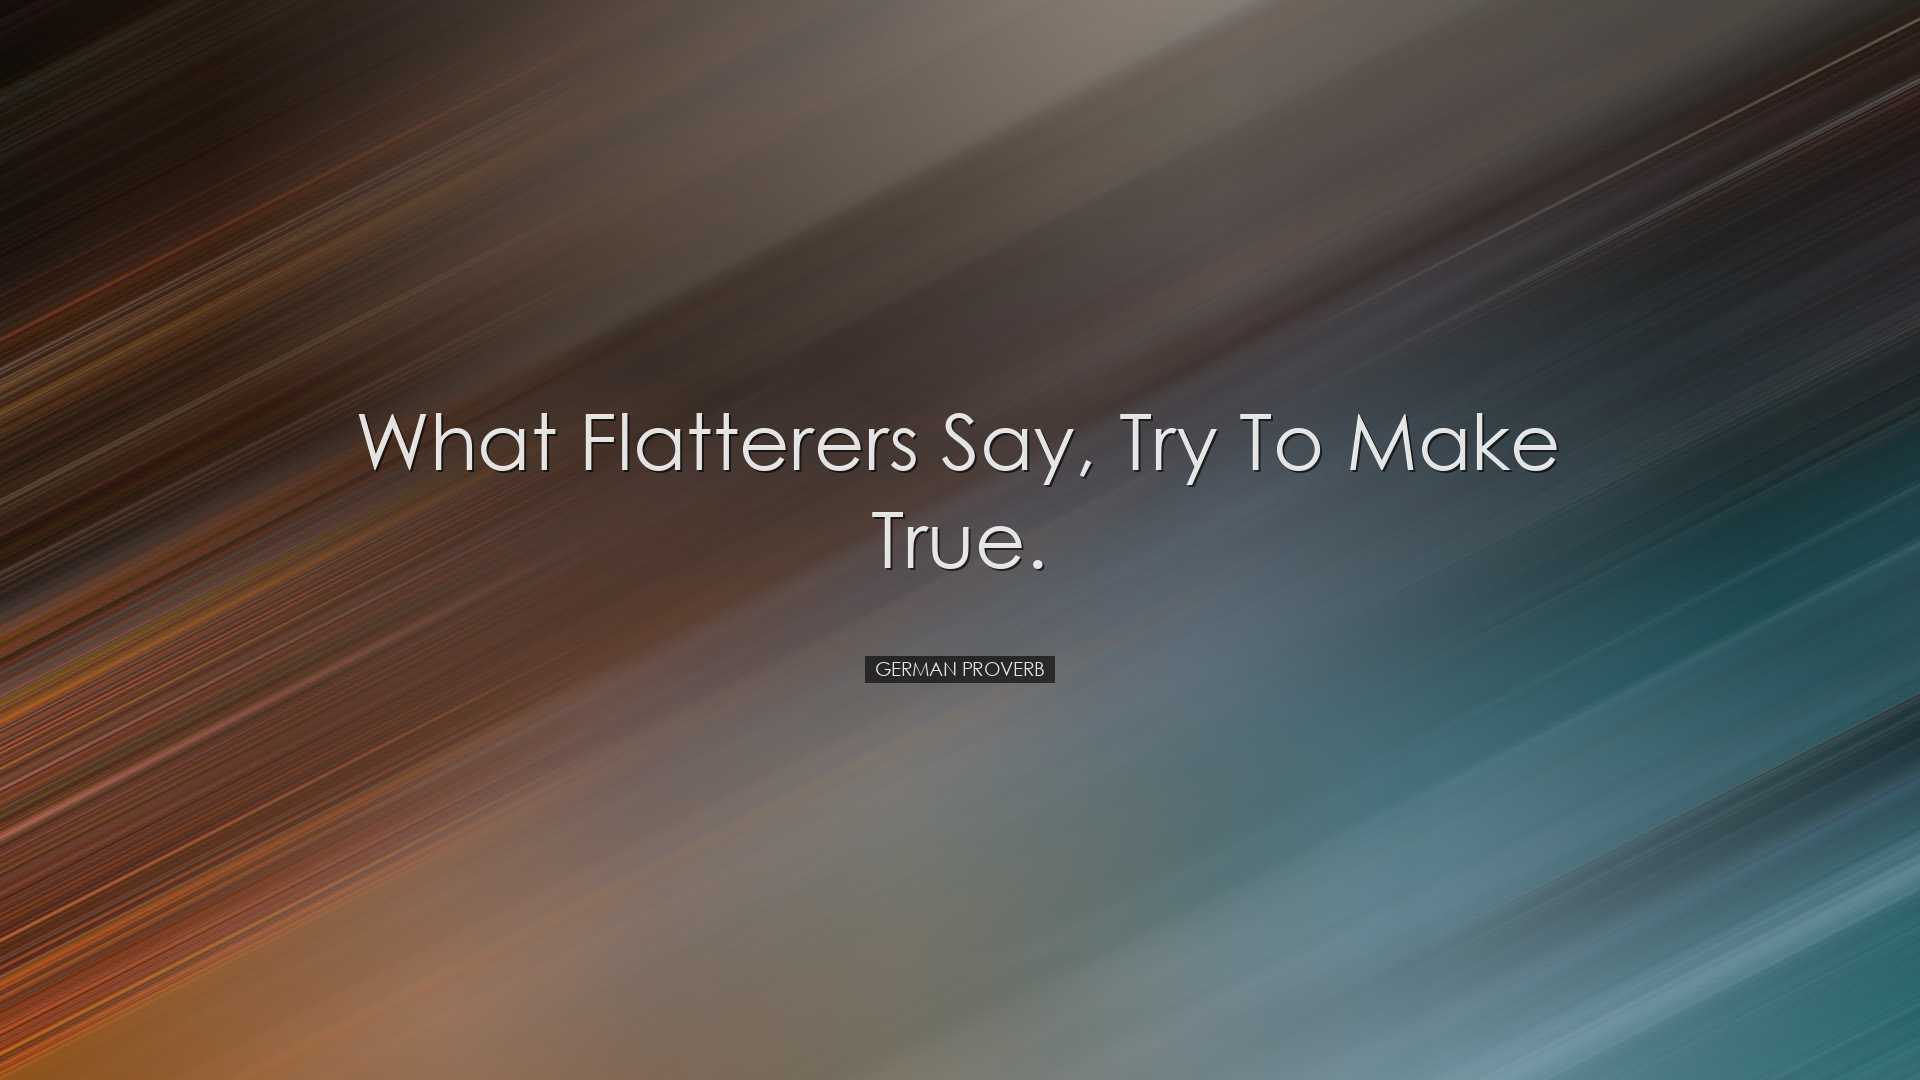 What flatterers say, try to make true. - German Proverb